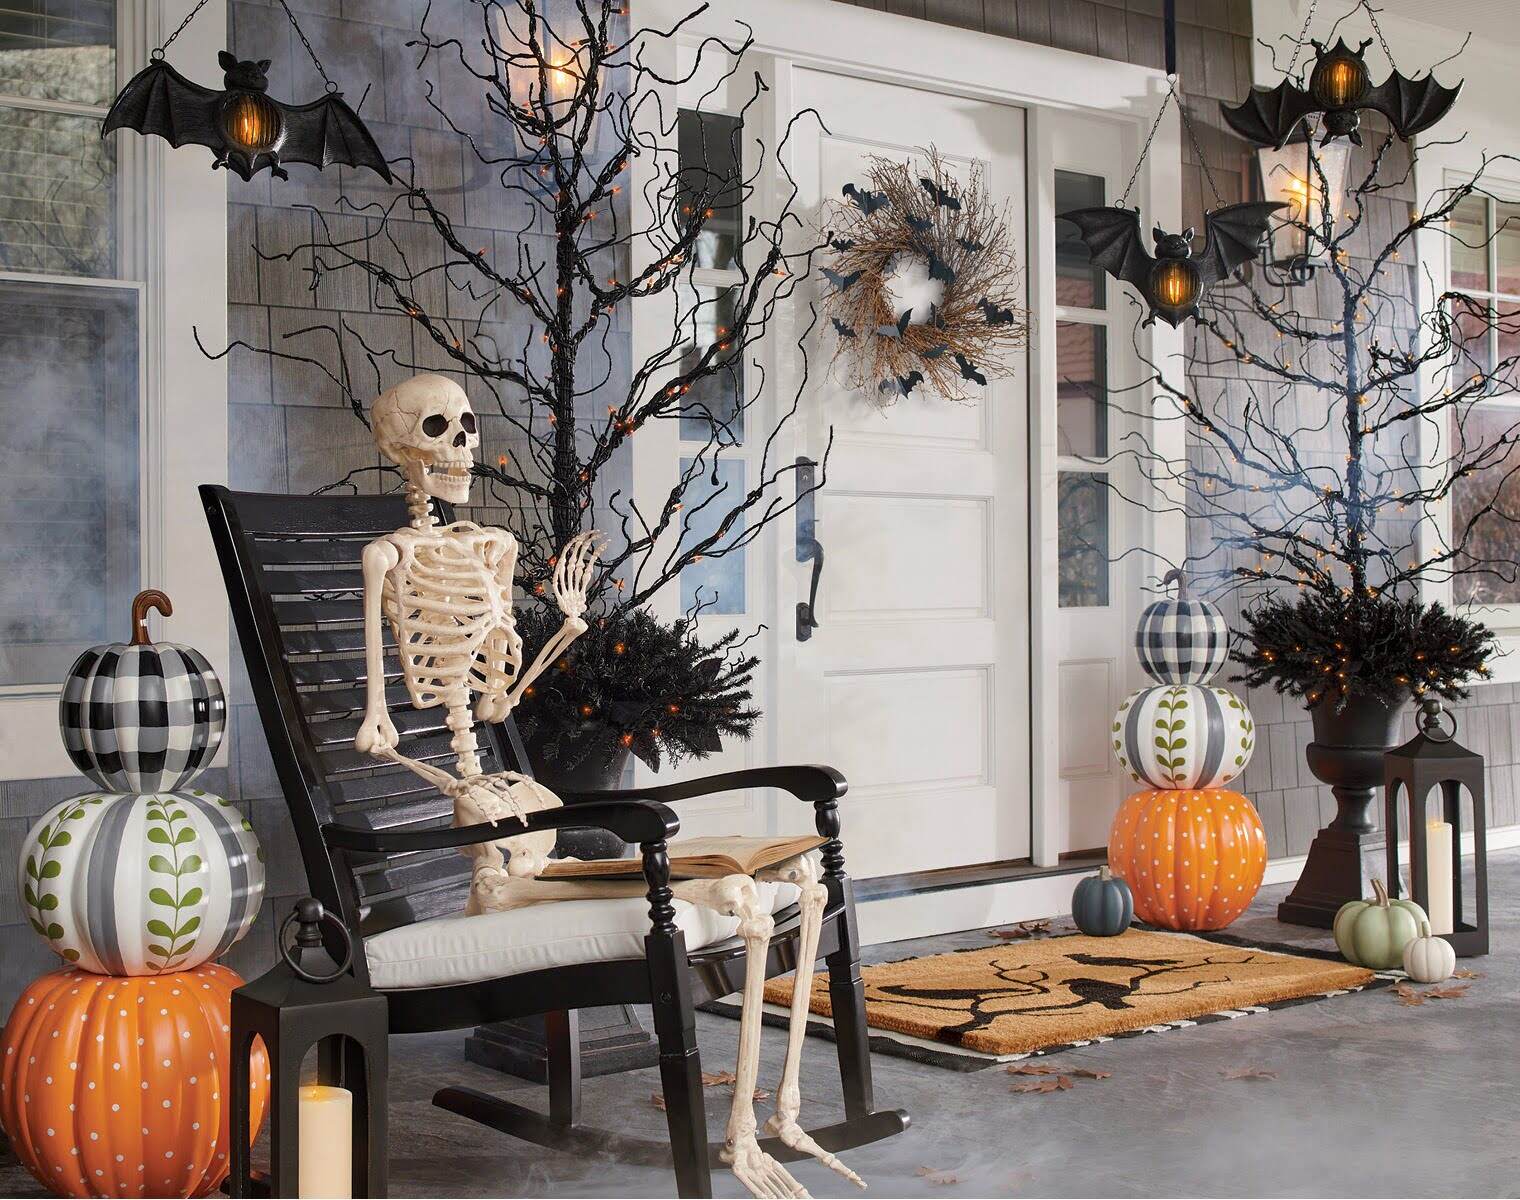 How To Decorate A Porch For Halloween